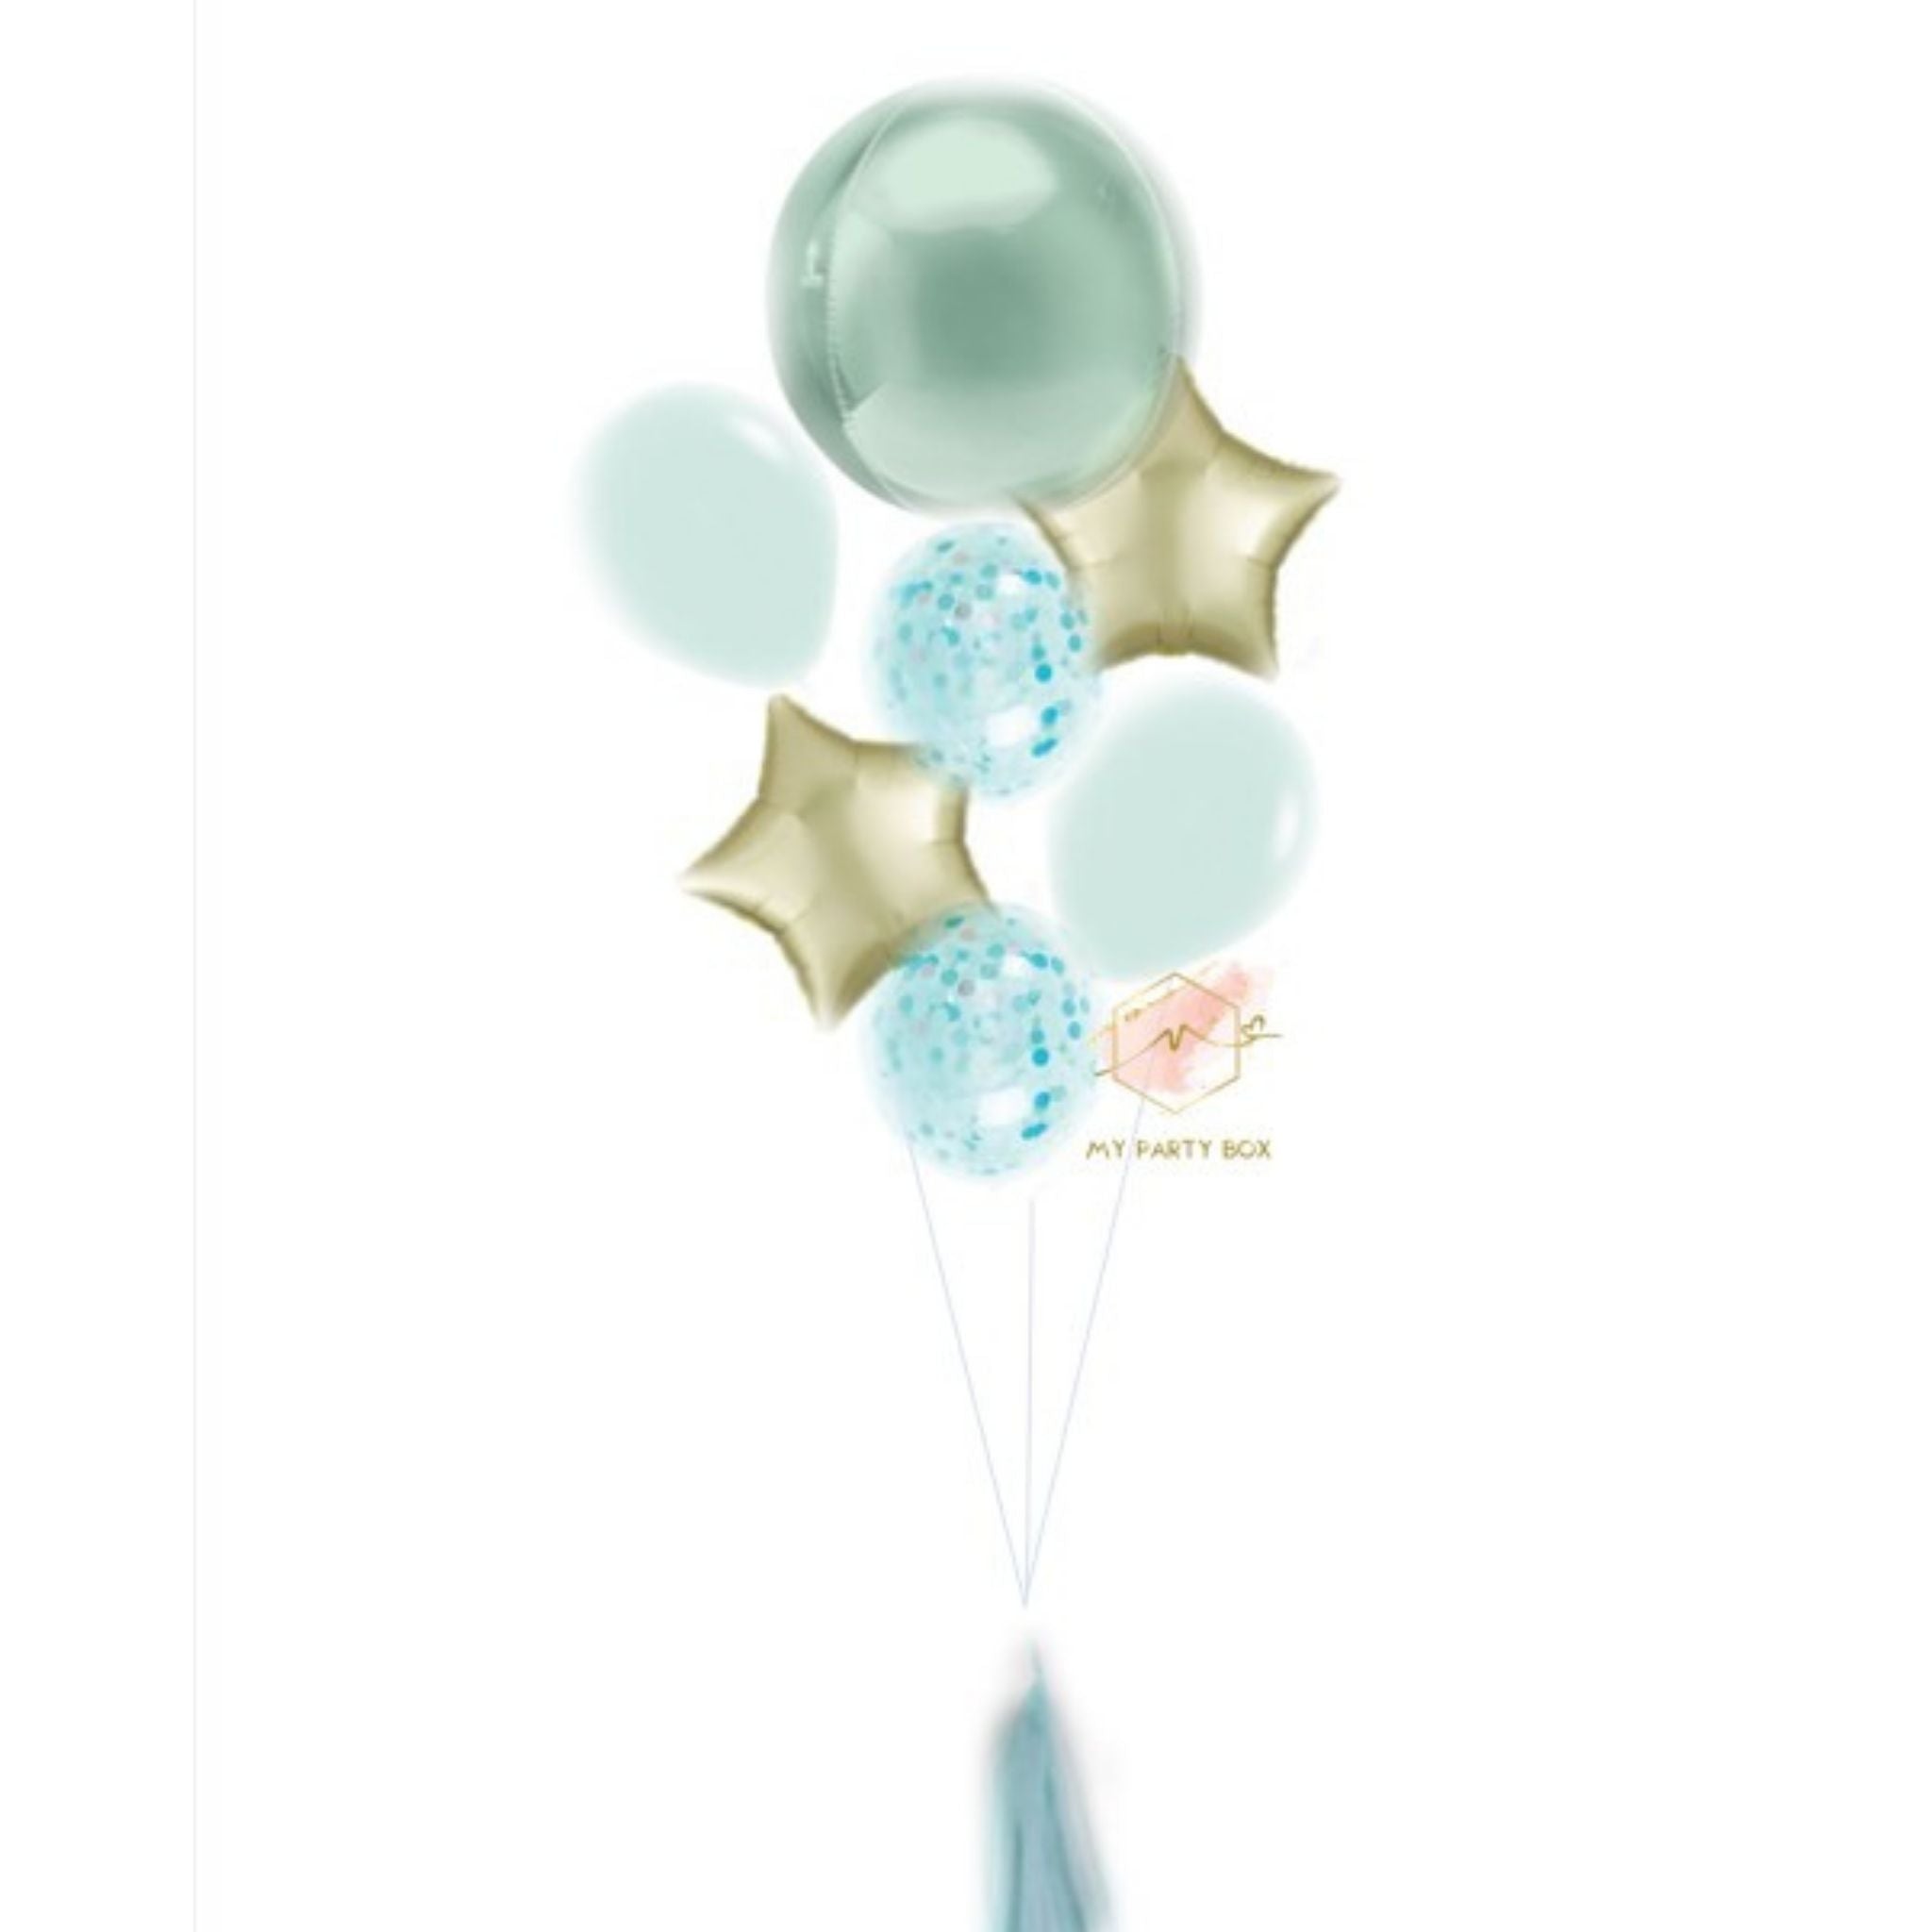 My Party Box Pastel Green Deluxe Balloon Bouquet